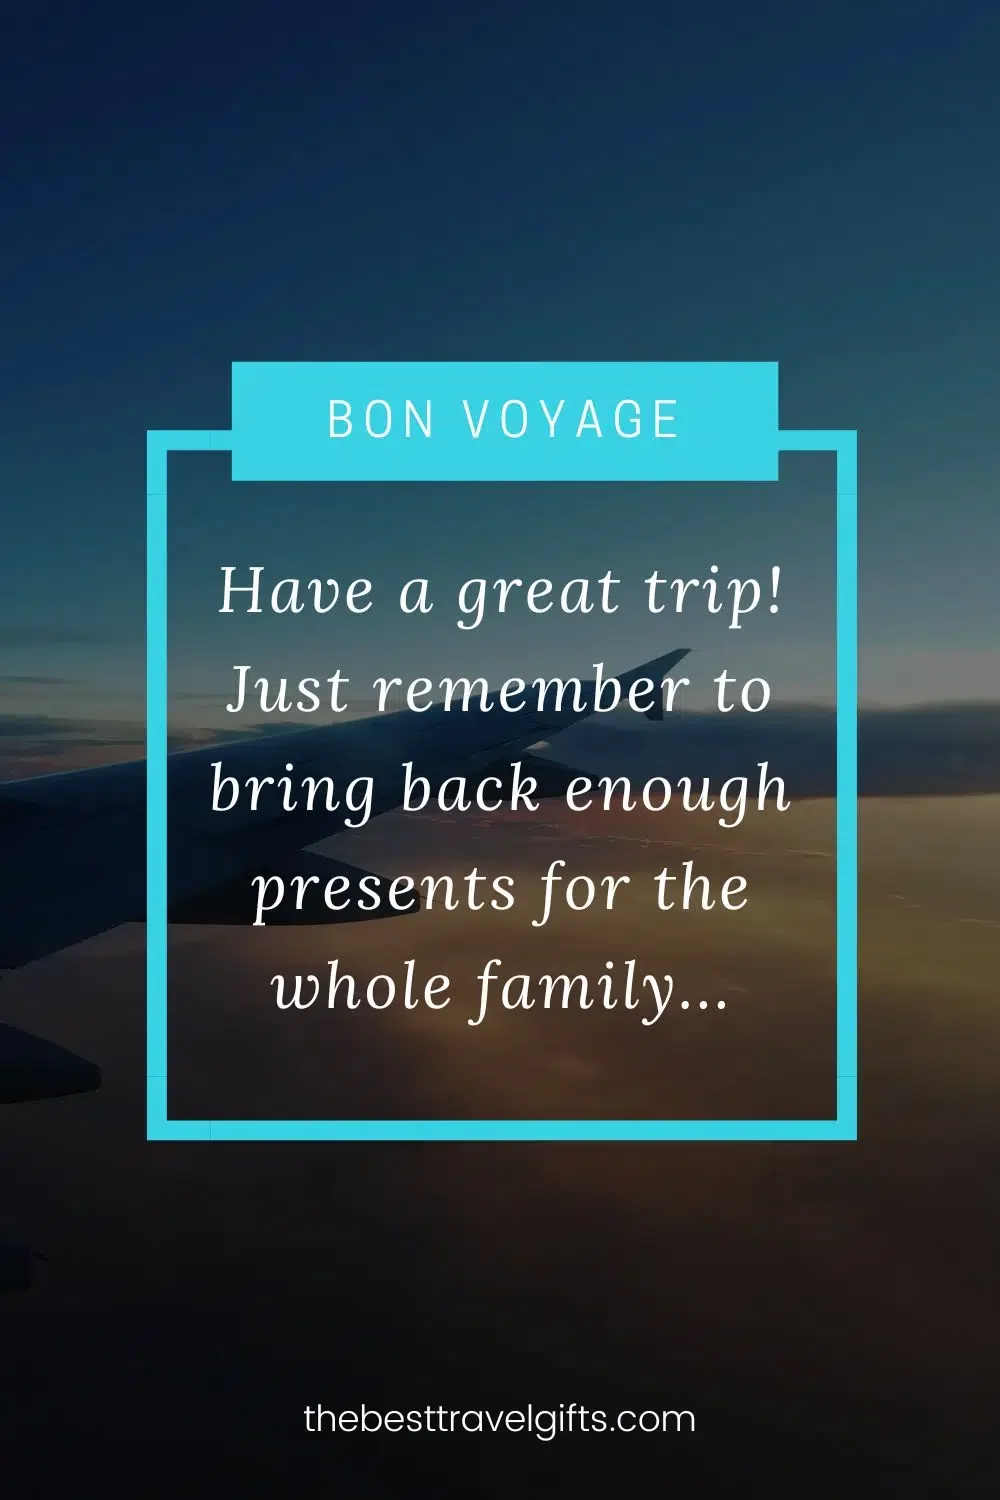 bon voyage messages for someone migrating